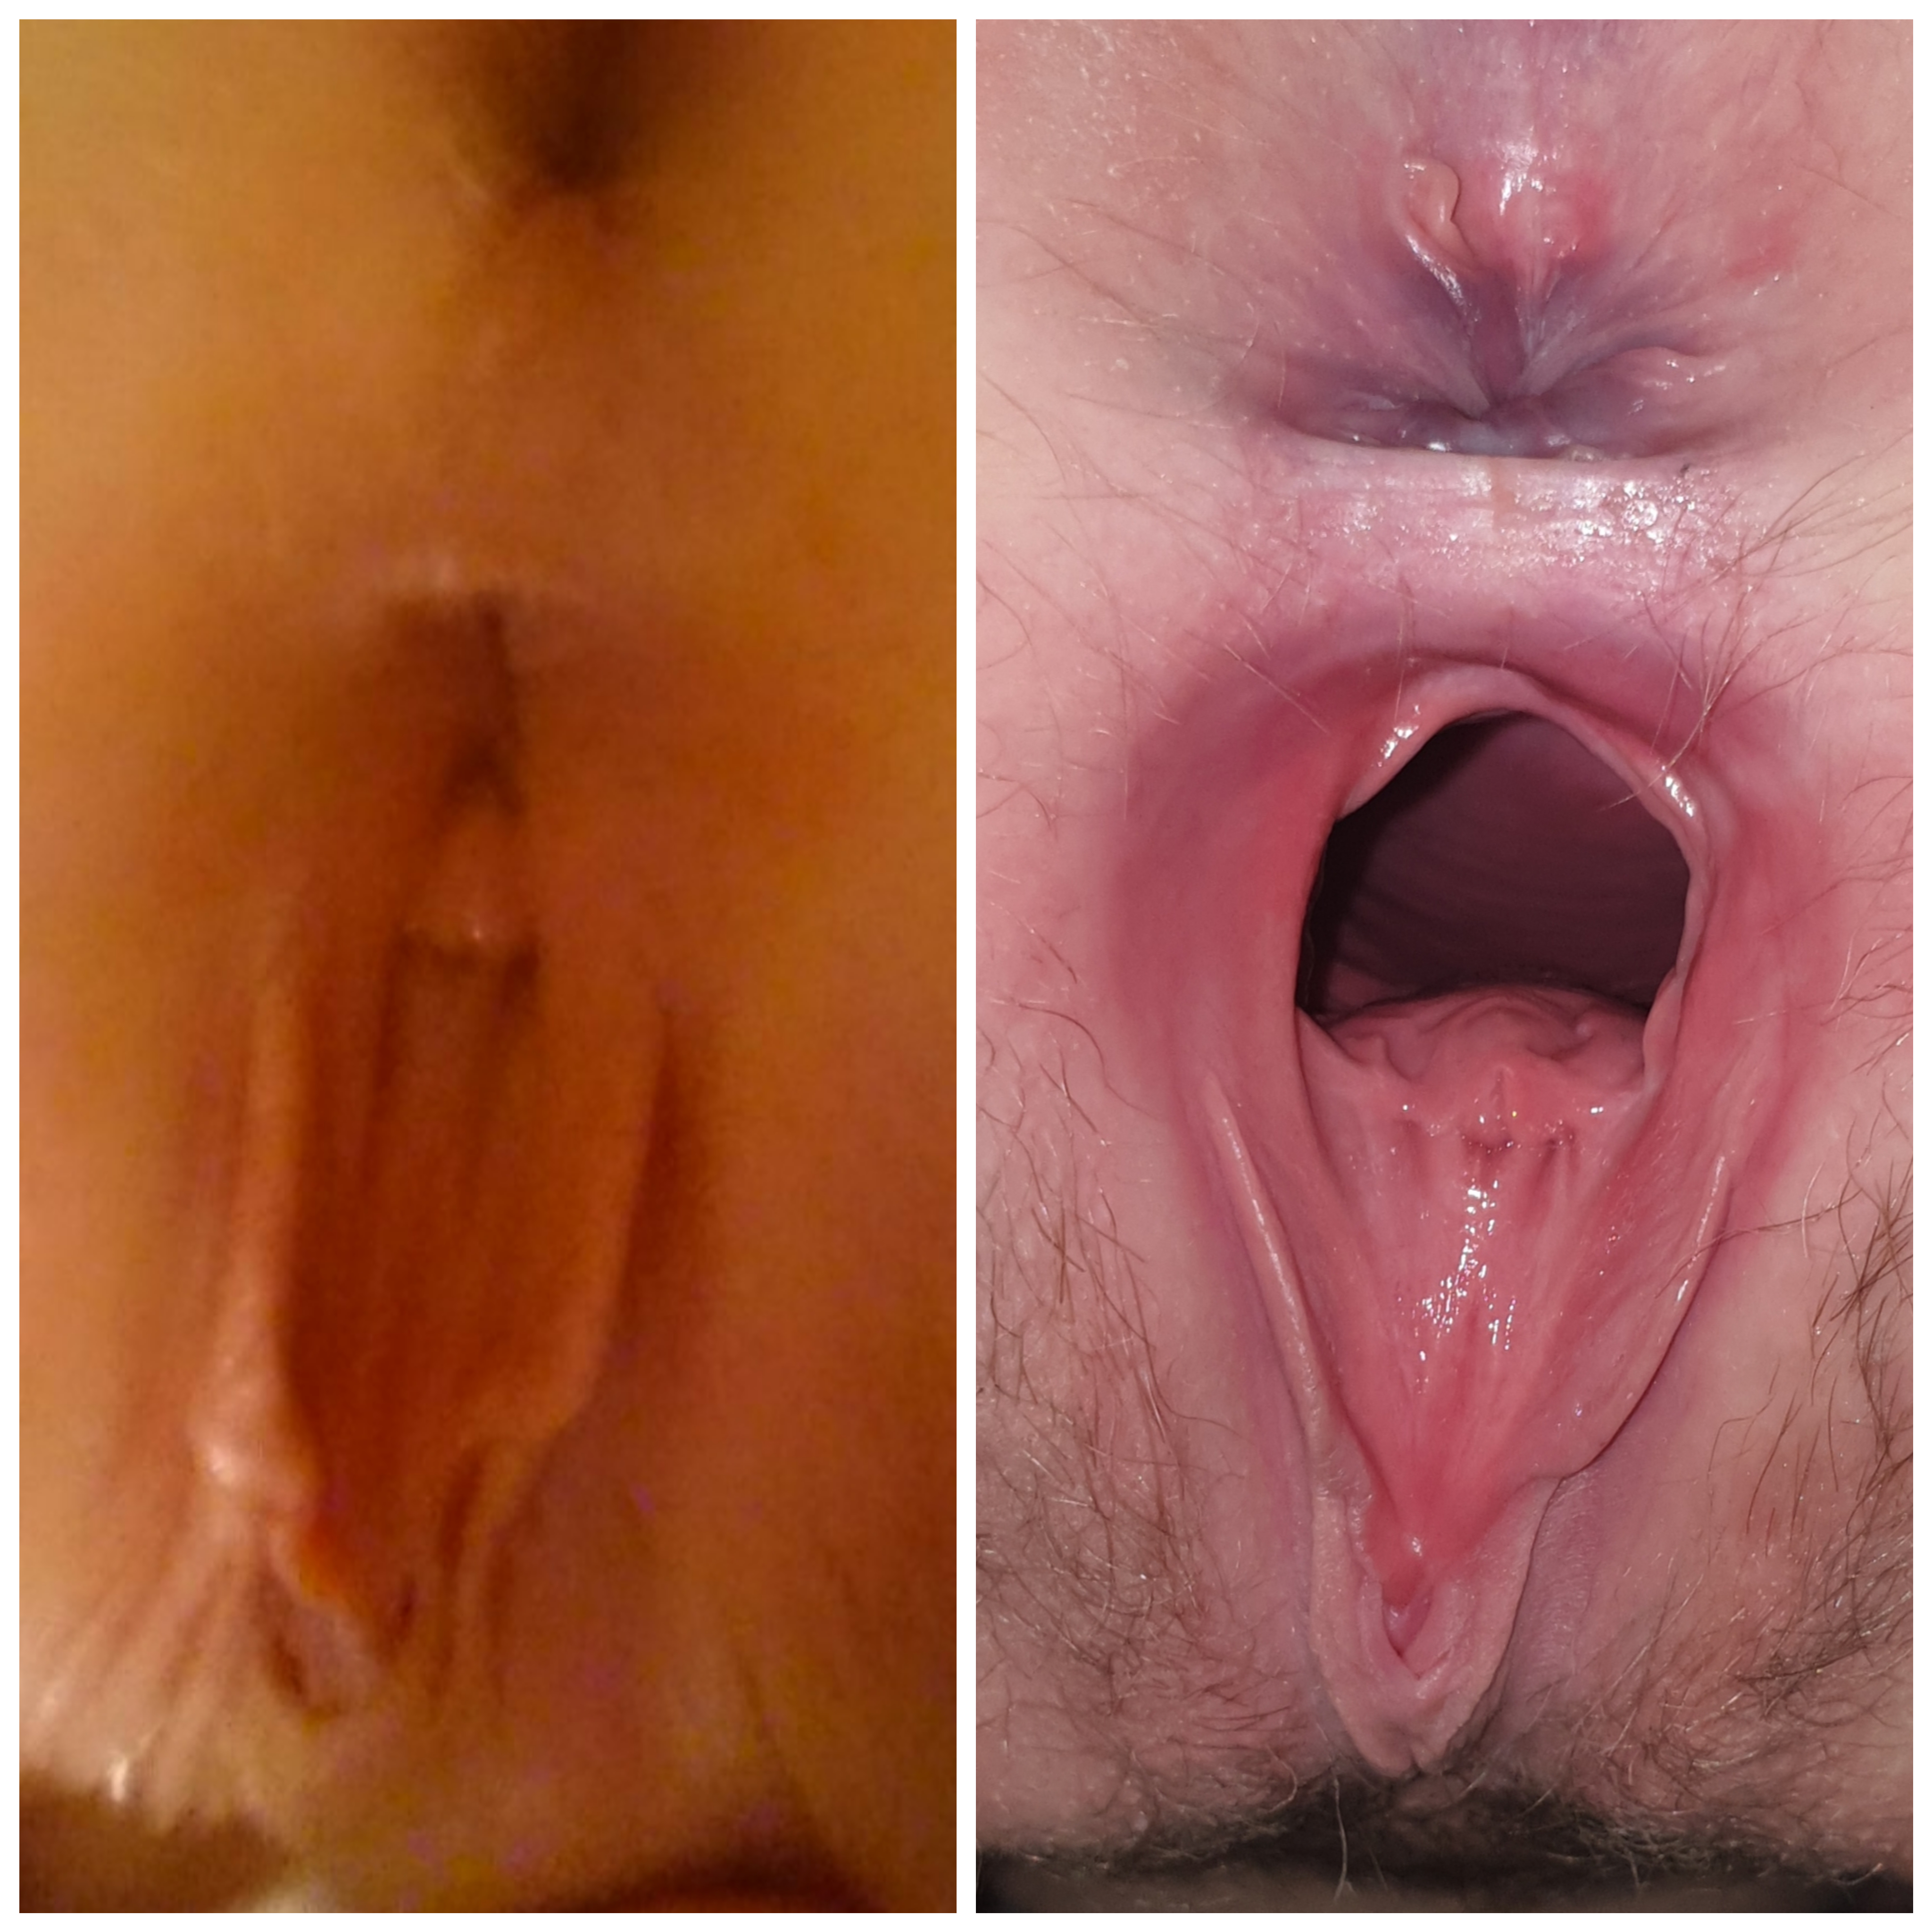 ashley ponte recommends 27 year old pussy pic